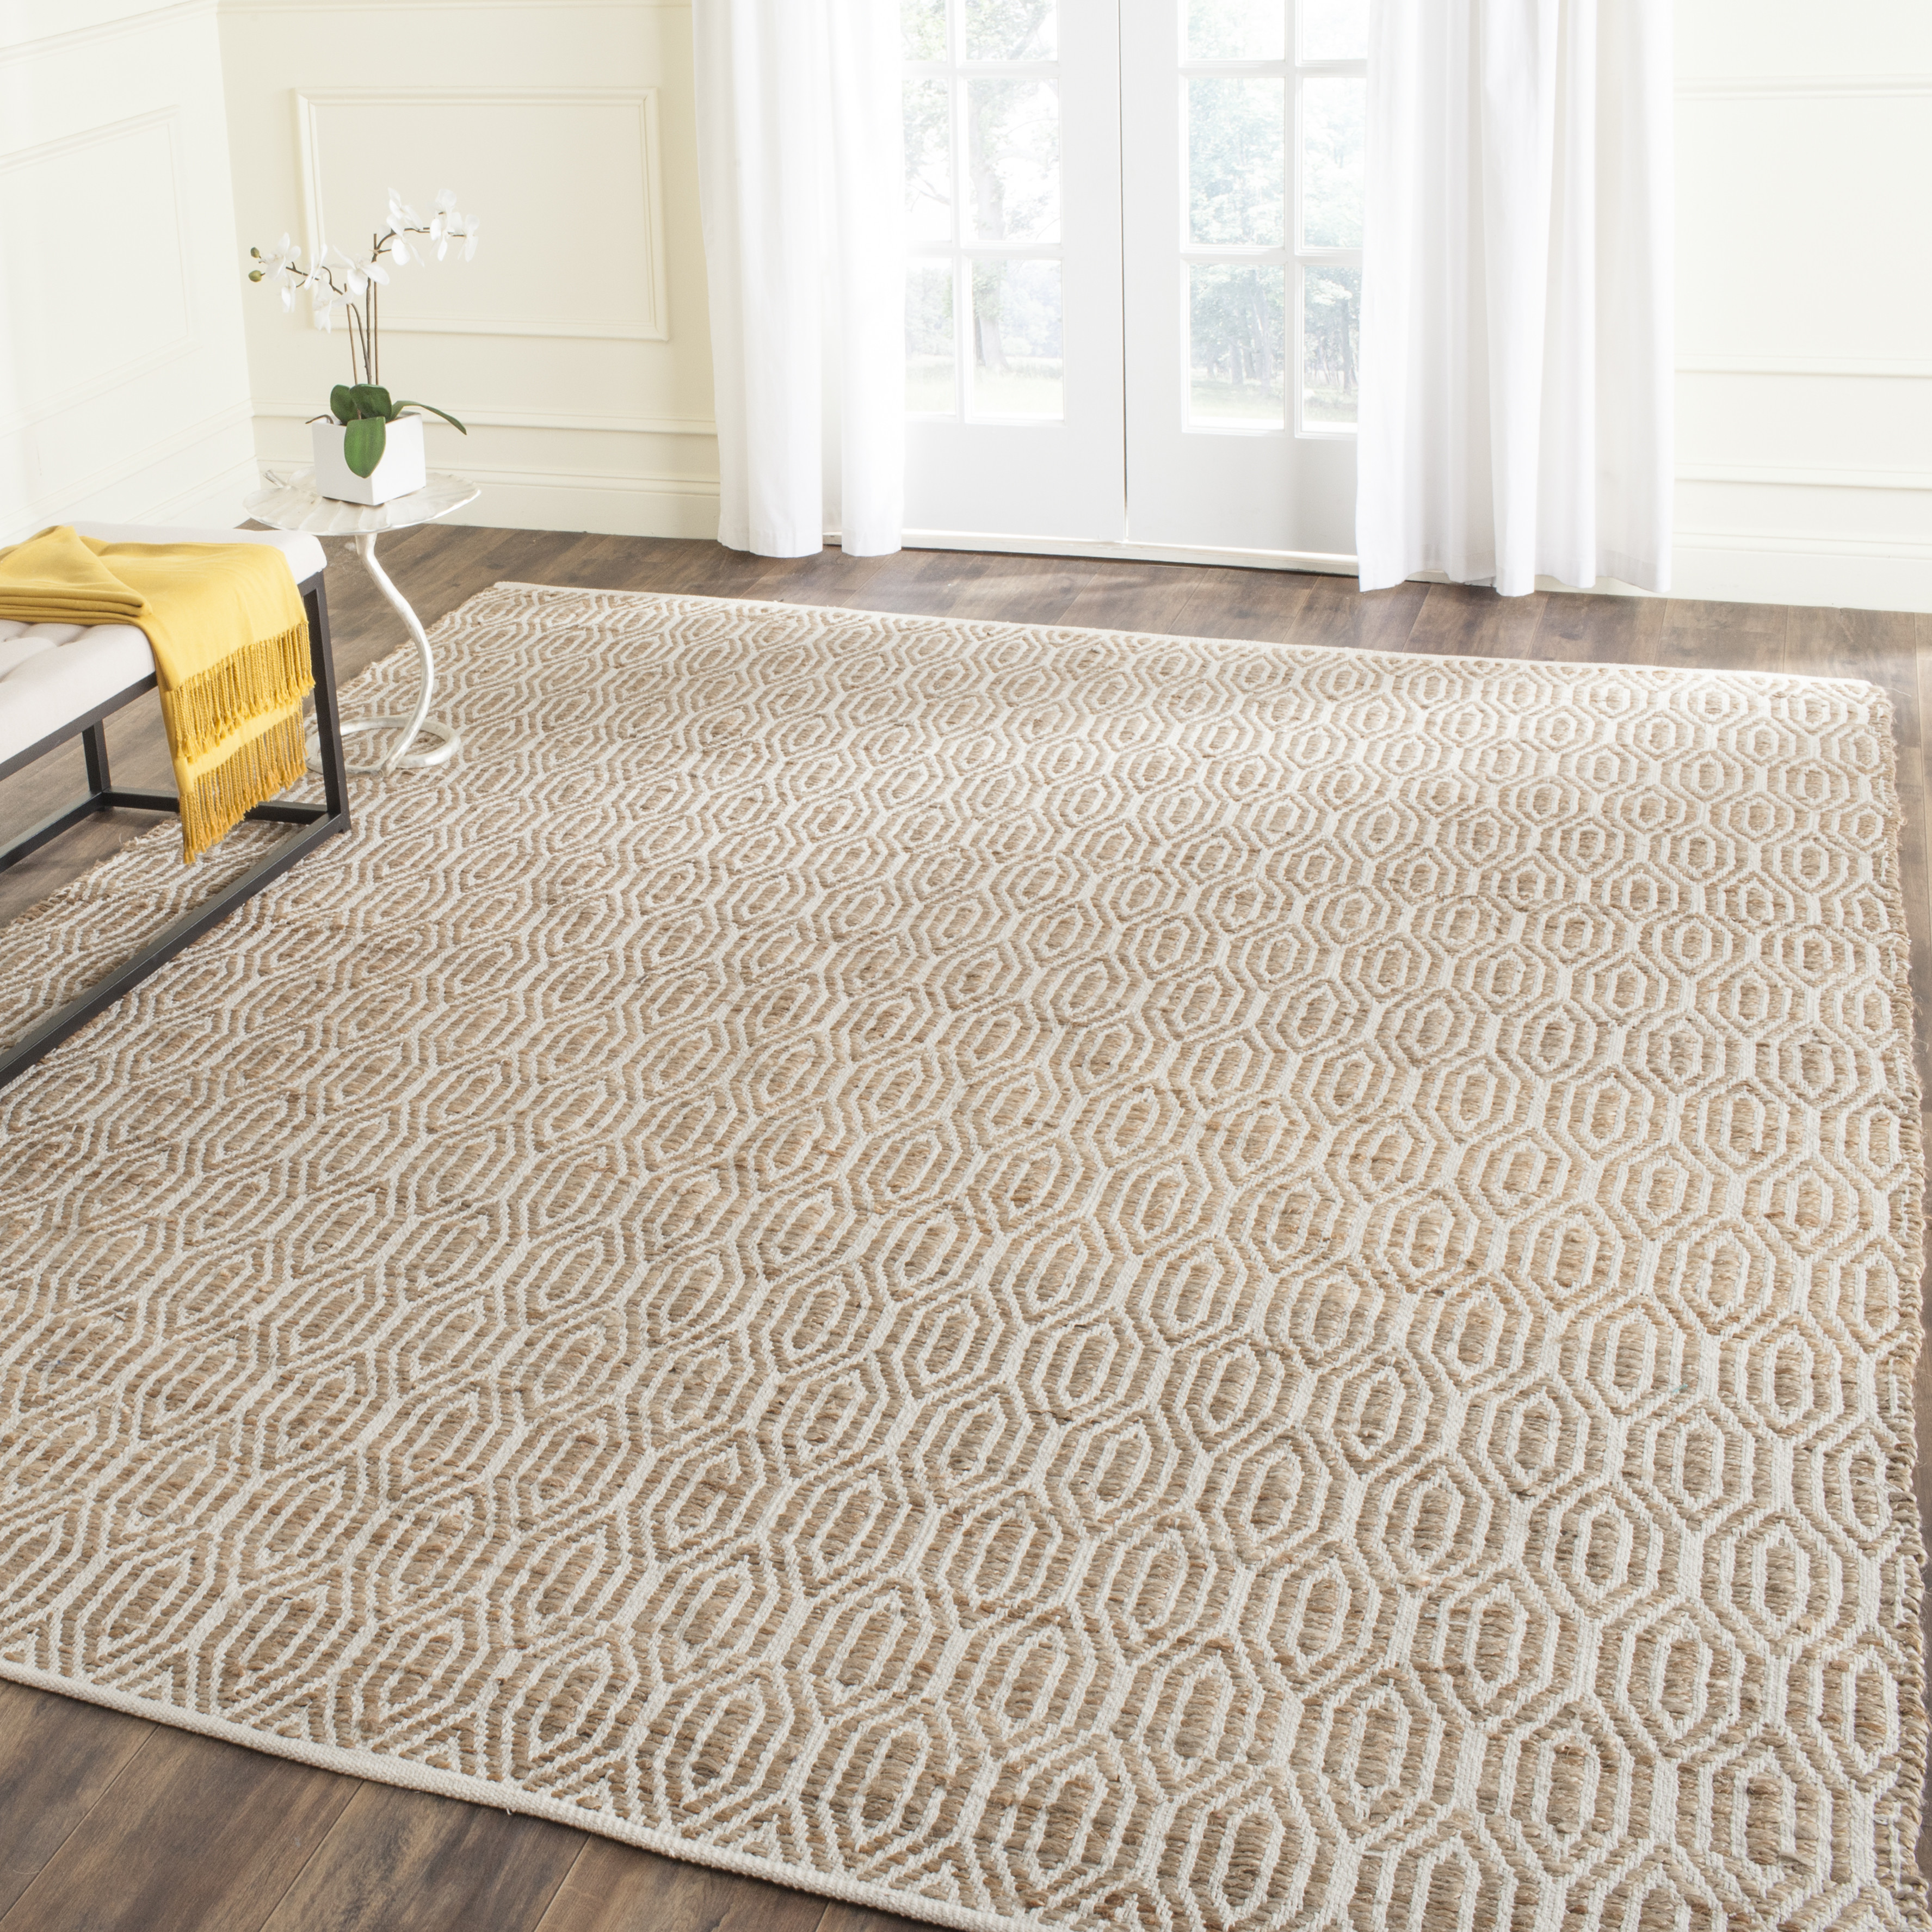 Best Beachcrest Homeu0026trade; Gilchrist Hand-Woven Natural Area Rug natural area rugs